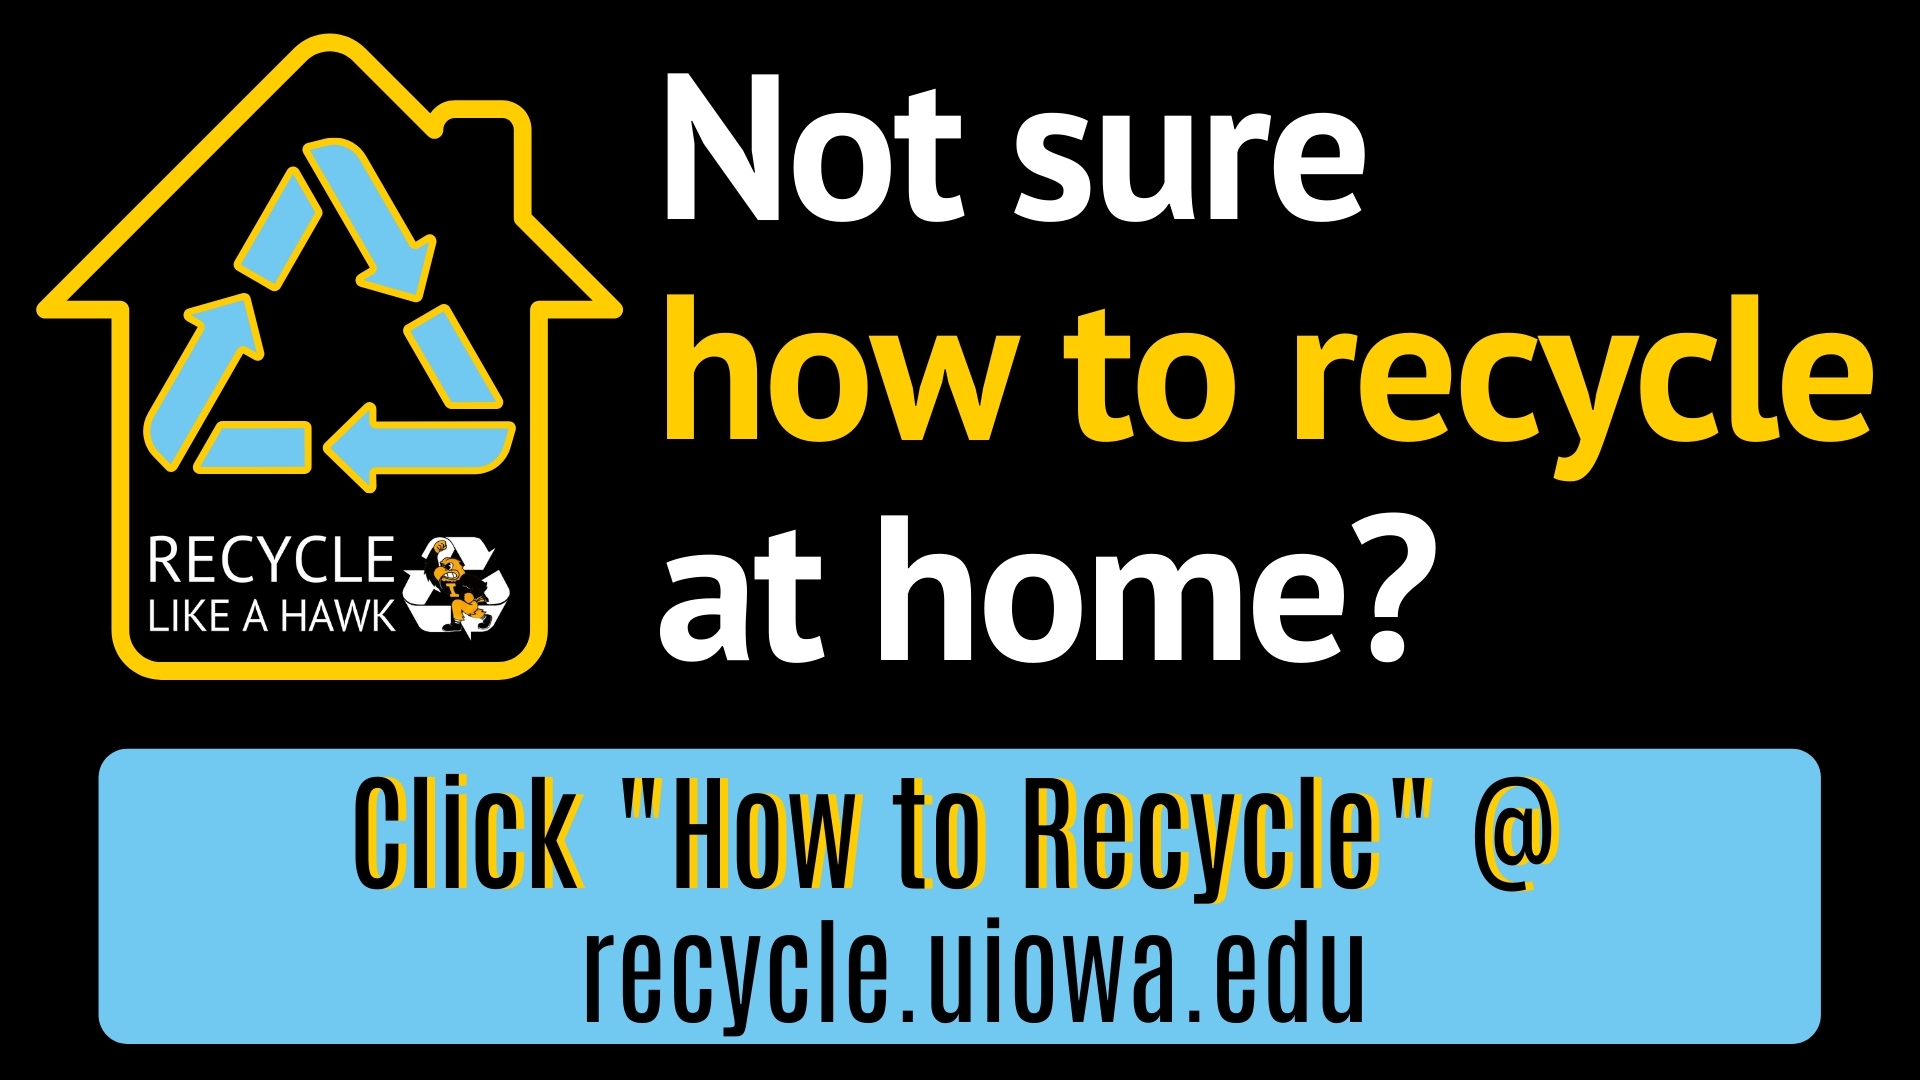 Not sure how to recycle at home? Click "how to recycle" @ recycle.uiowa.edu 